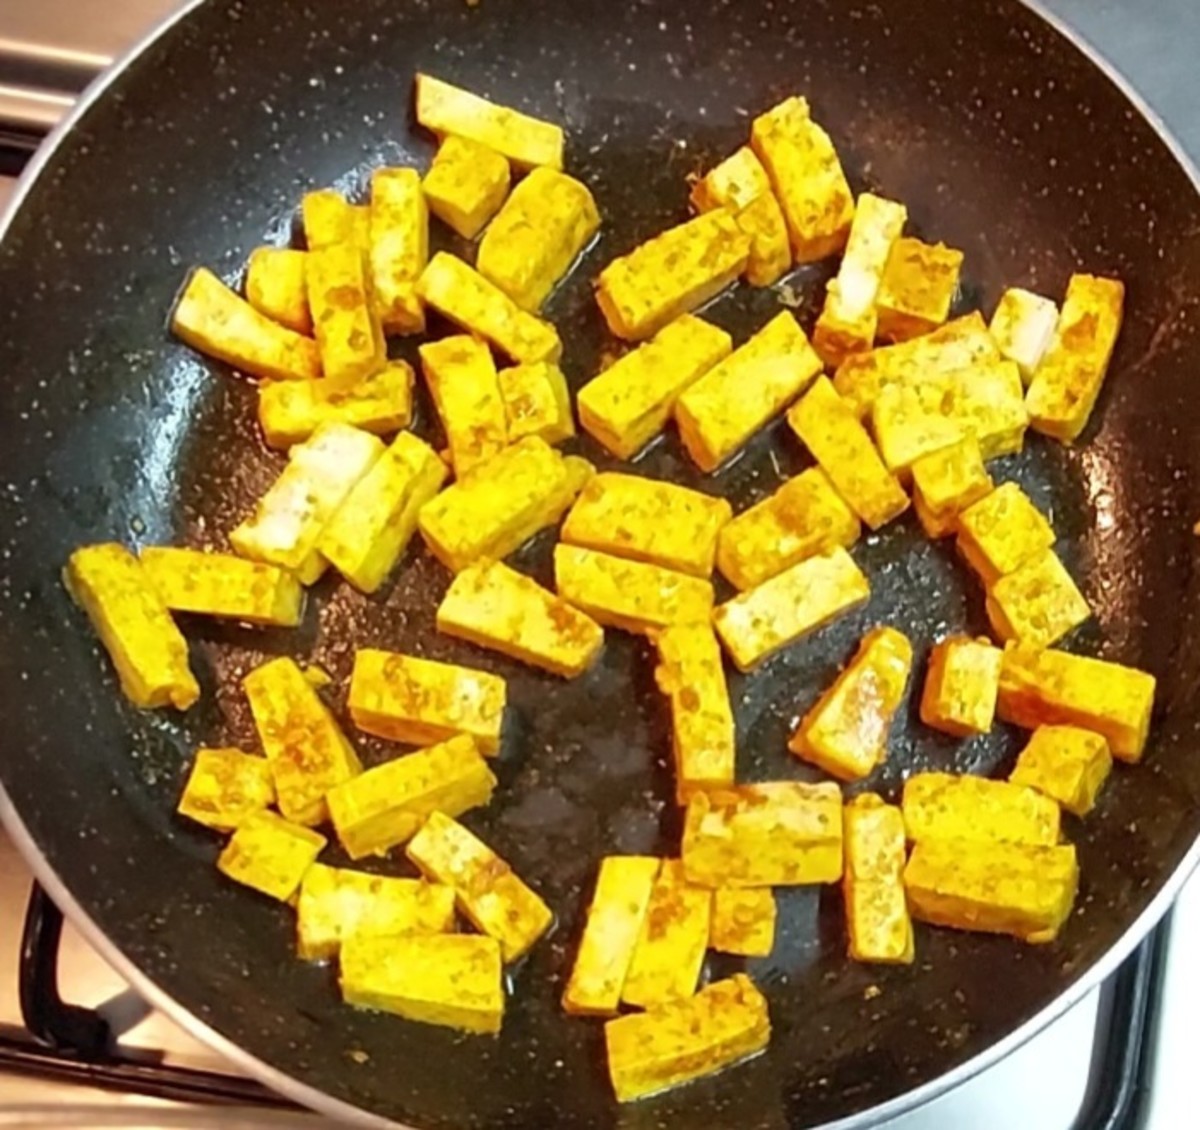 Meanwhile, heat 1 1/2 teaspoon ghee in a frying pan, spreading the ghee all over the pan. Add cubed paneer pieces. Add 1/4 teaspoon turmeric powder, 1/2 teaspoon red chili powder and mix to coat paneer with spices.